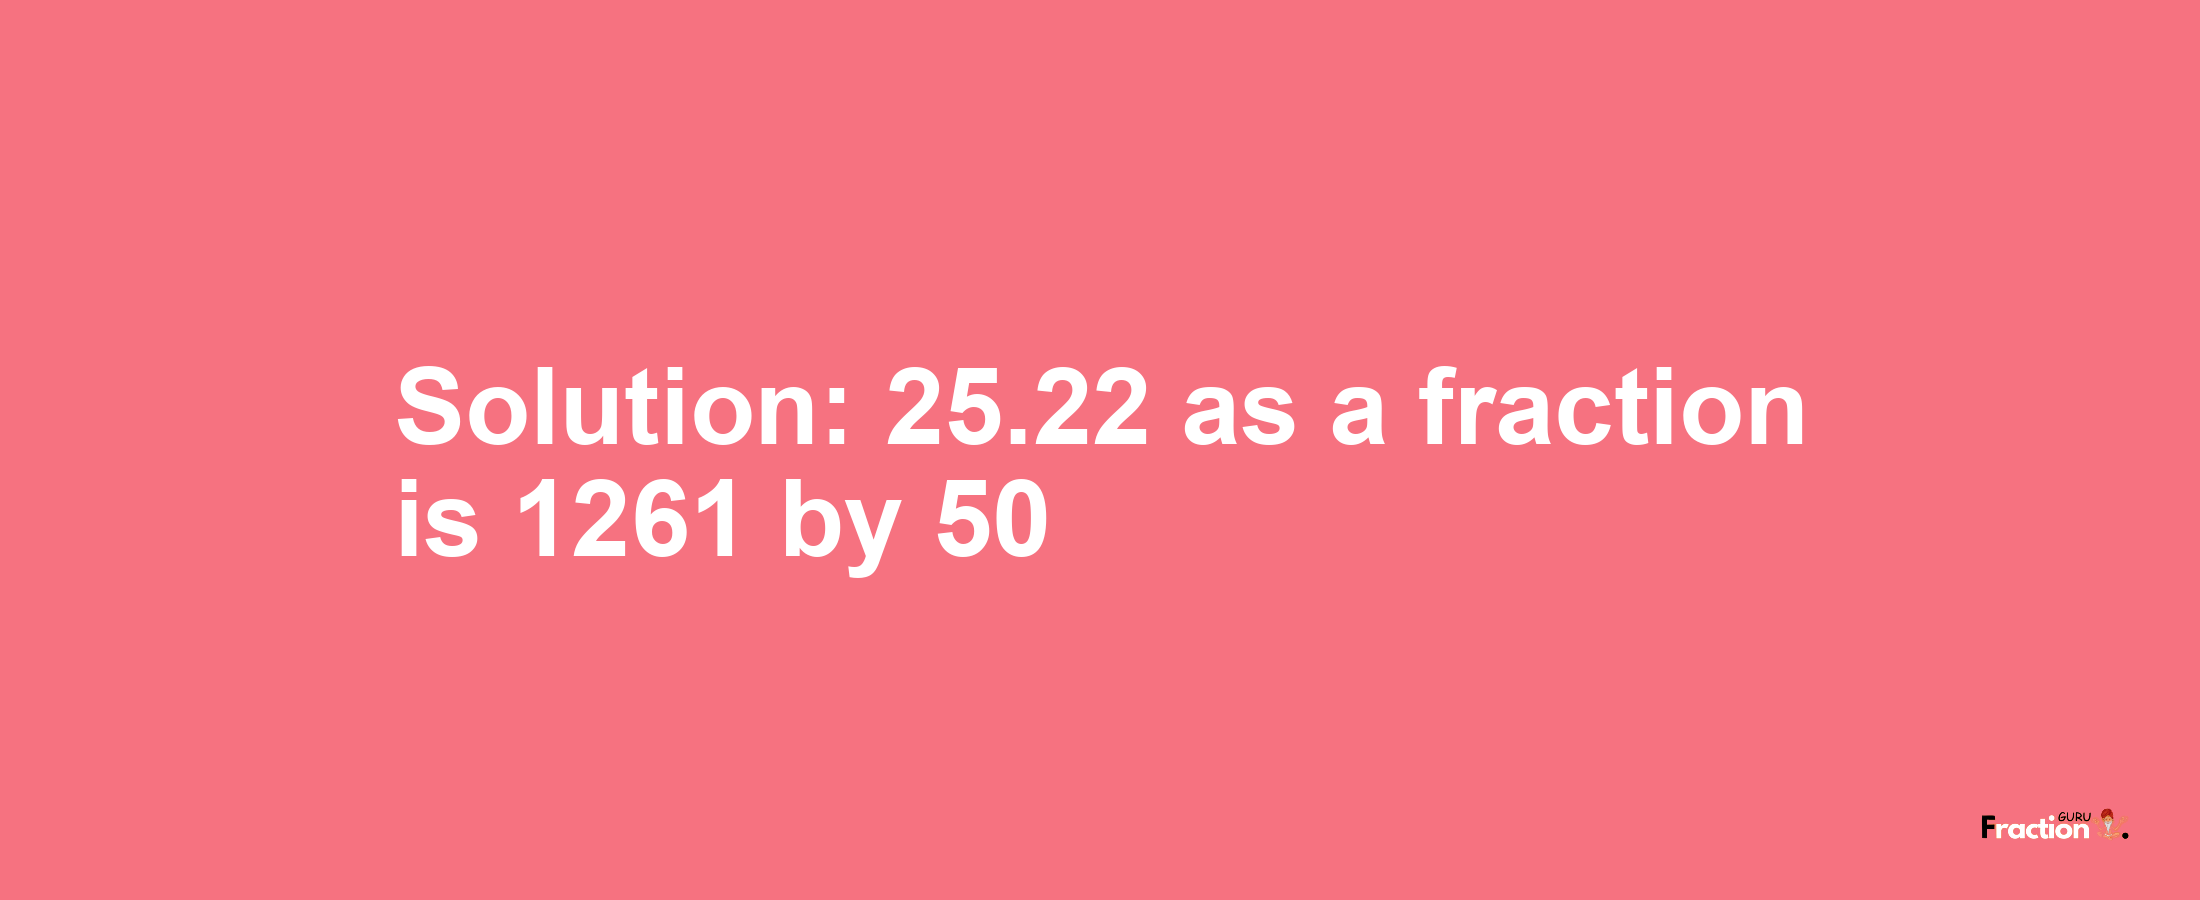 Solution:25.22 as a fraction is 1261/50